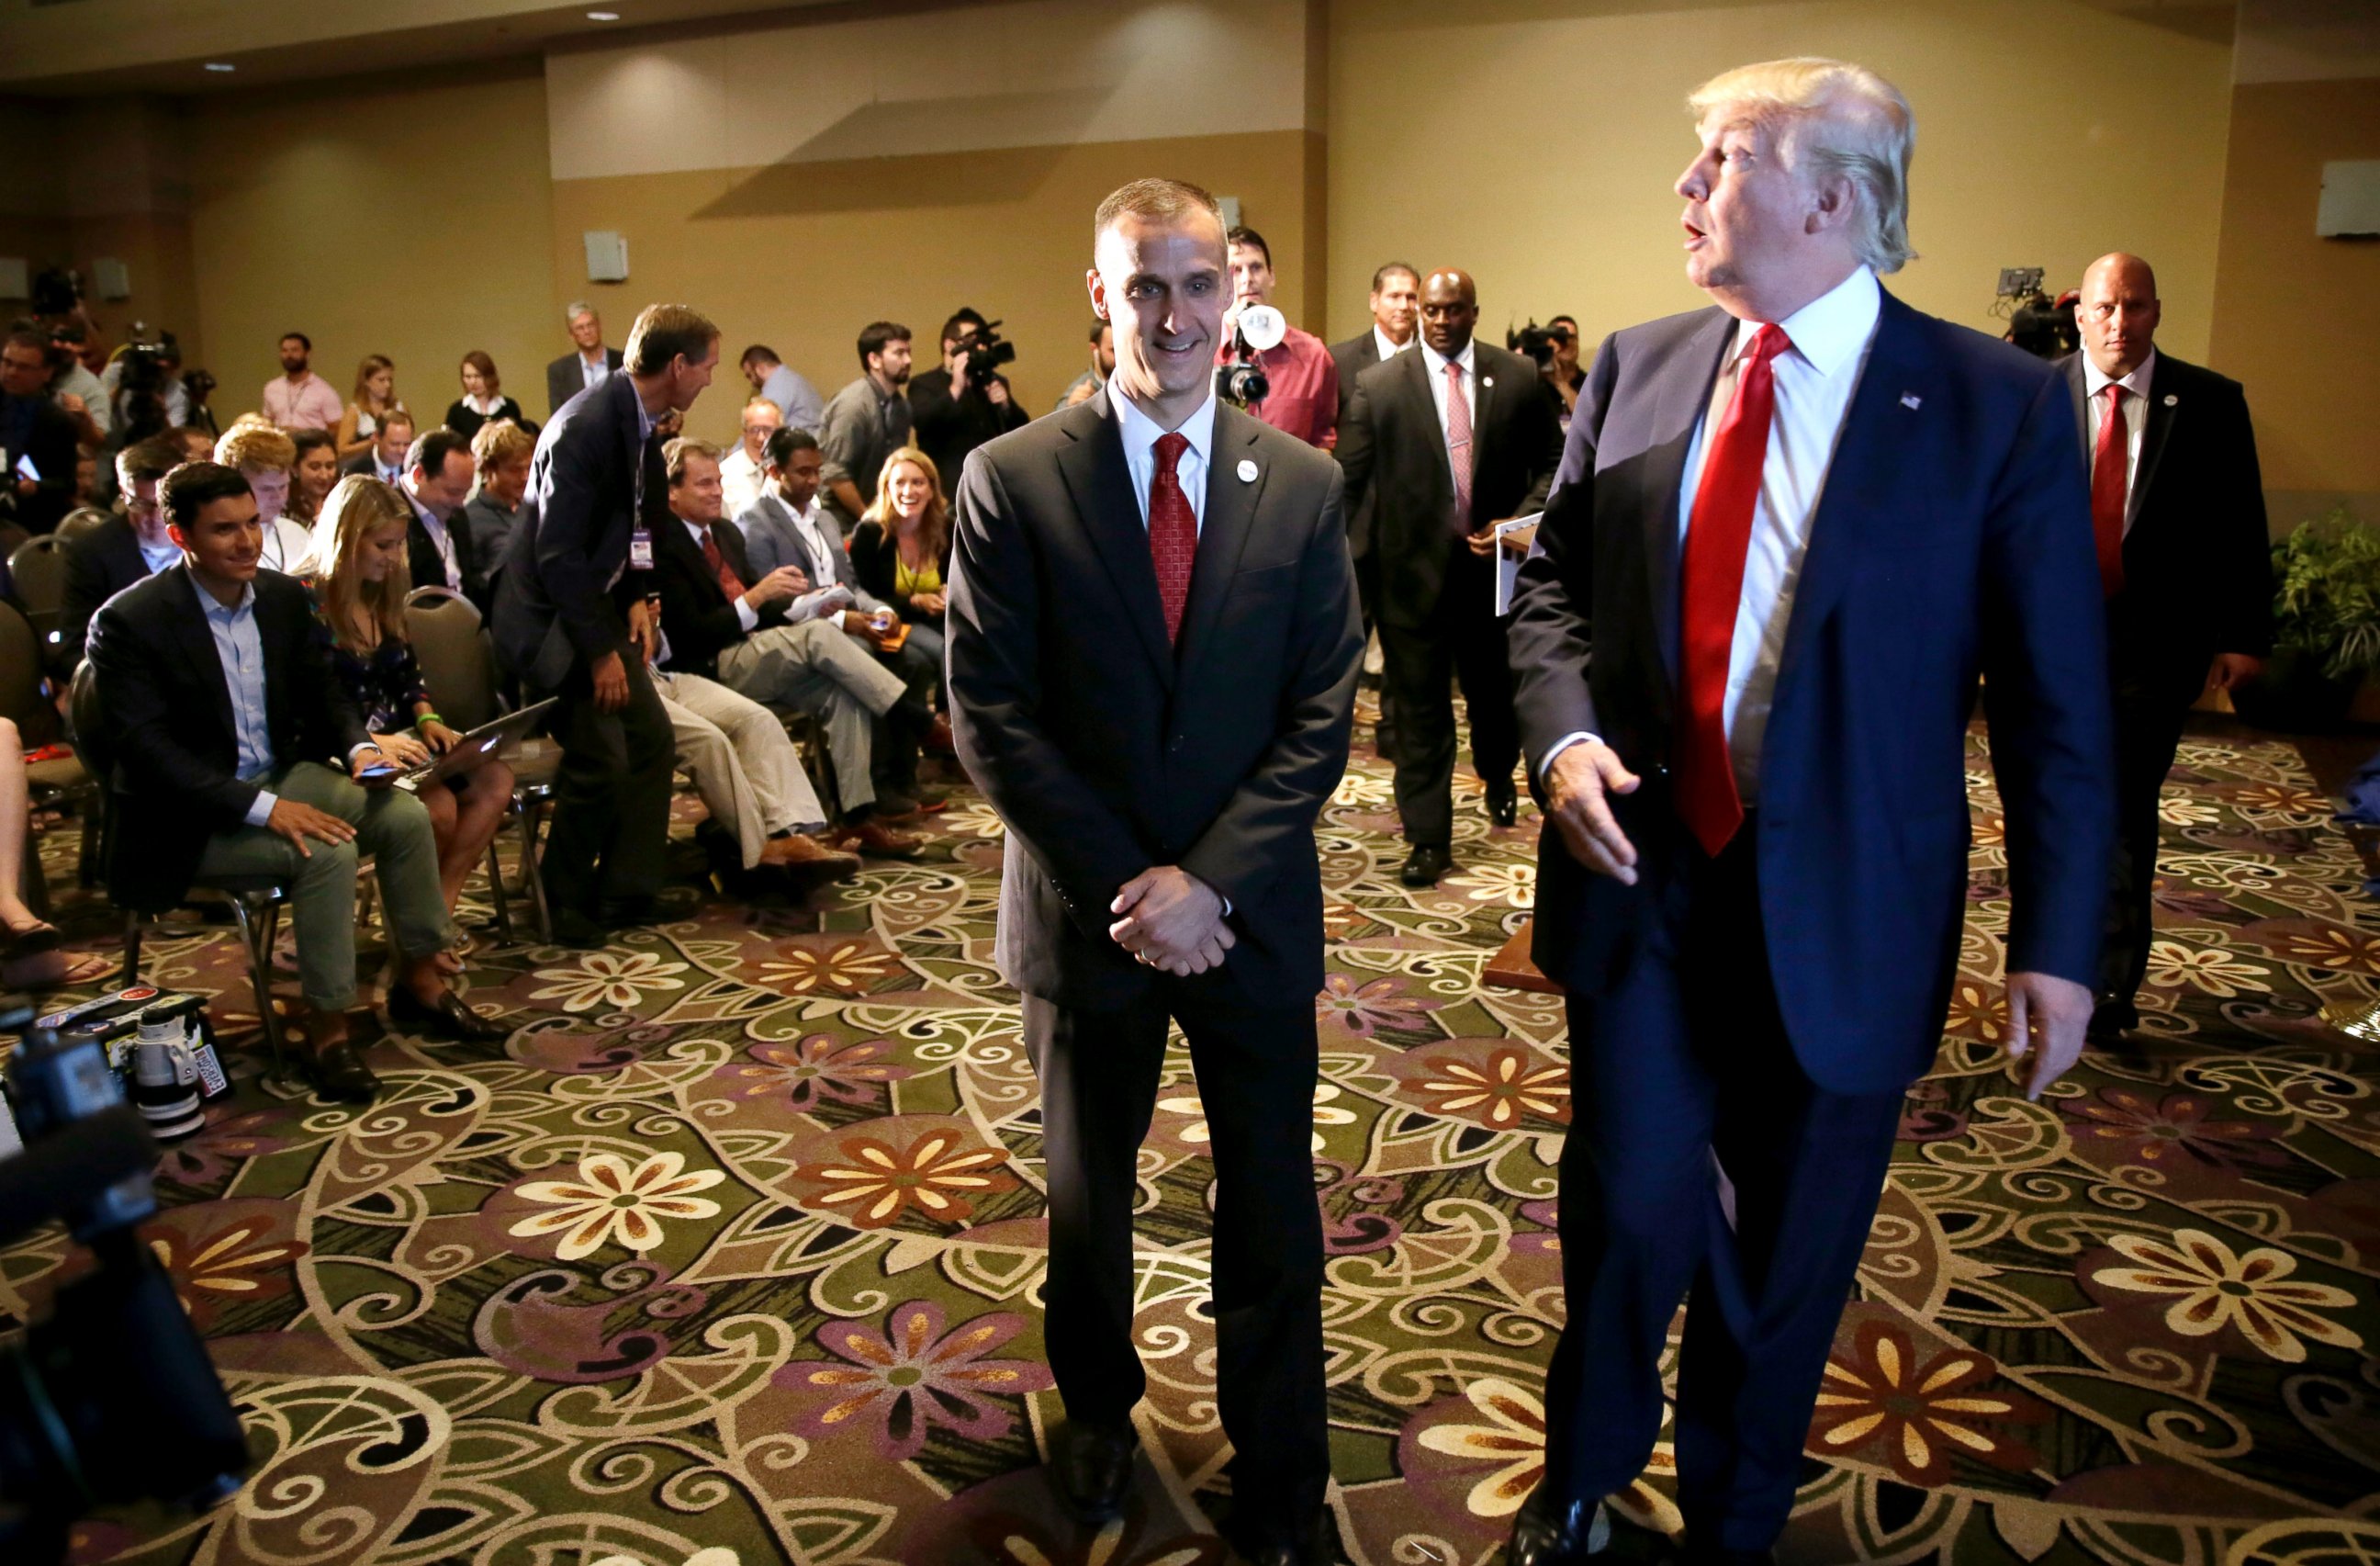 PHOTO: Republican presidential candidate Donald Trump, right, walks with his campaign manager Corey Lewandowski after speaking at a news conference in Dubuque, Iowa, Aug. 25, 2015.